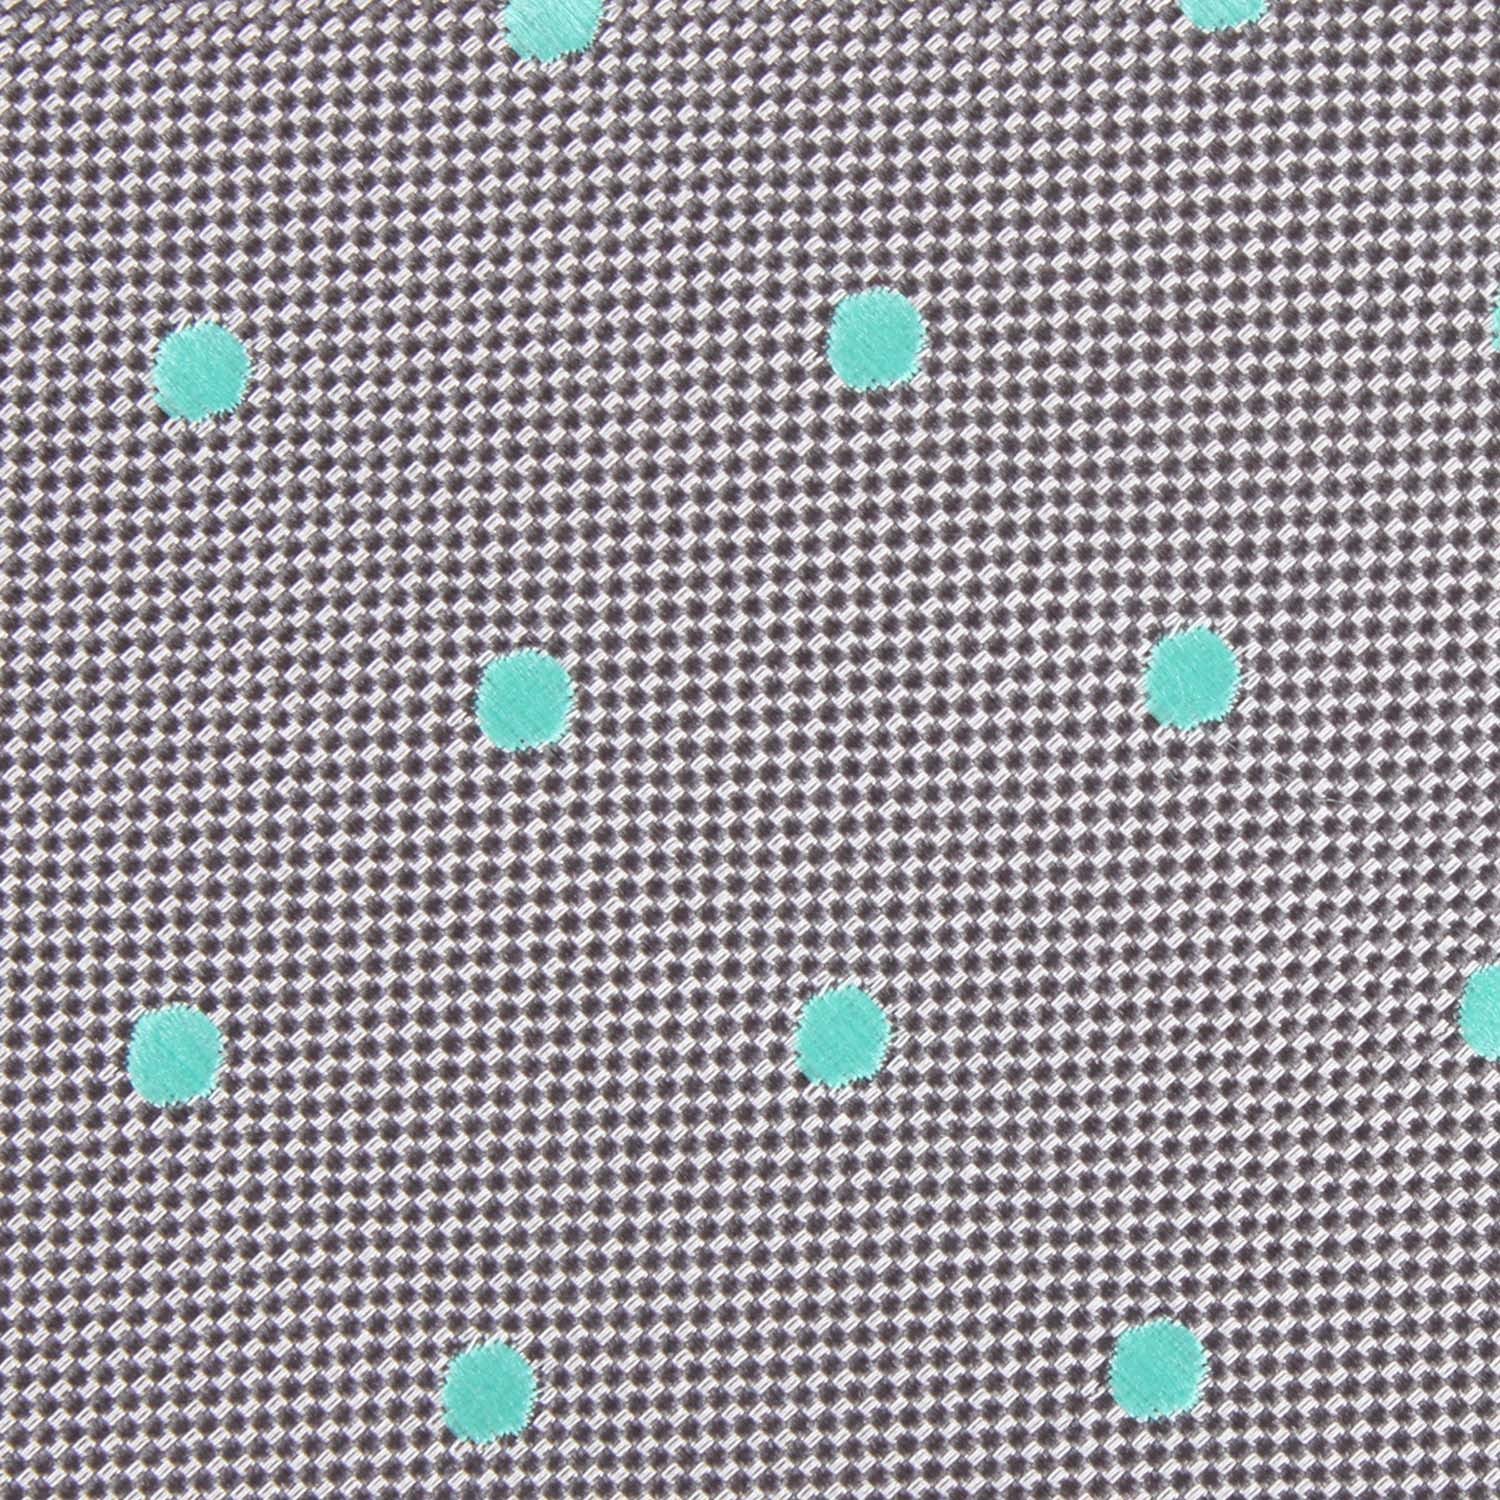 Grey with Mint Green Polka Dots Fabric Pocket Square M114